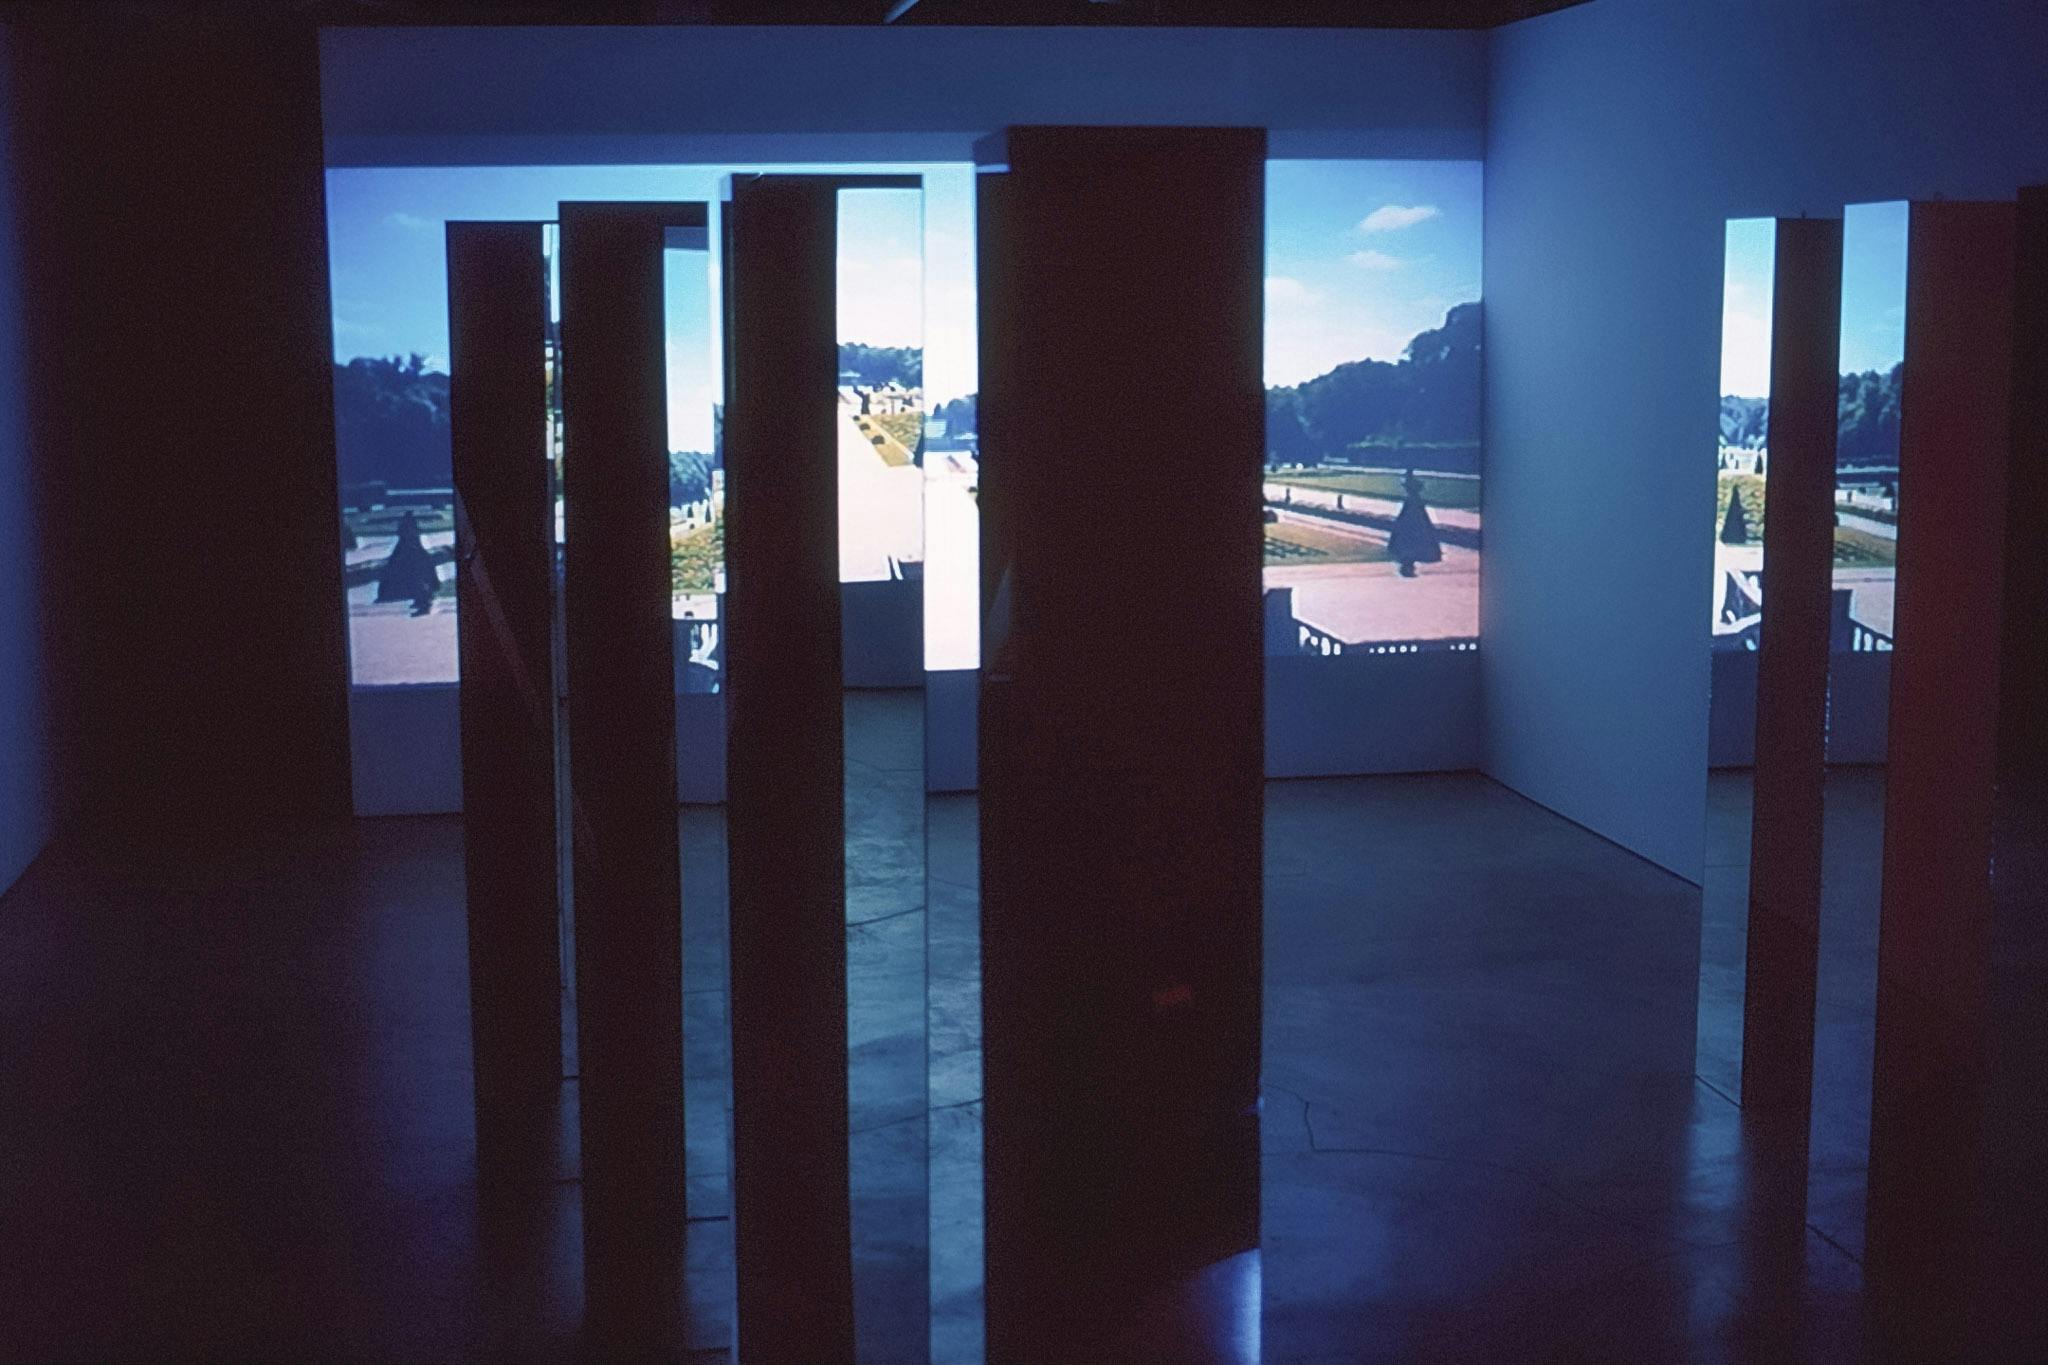 Eight large mirrored columns stand on the gallery floor, reflecting a photographed image of a garden projected on the front wall. The garden seems large and symmetrical. The gallery space is darkened.